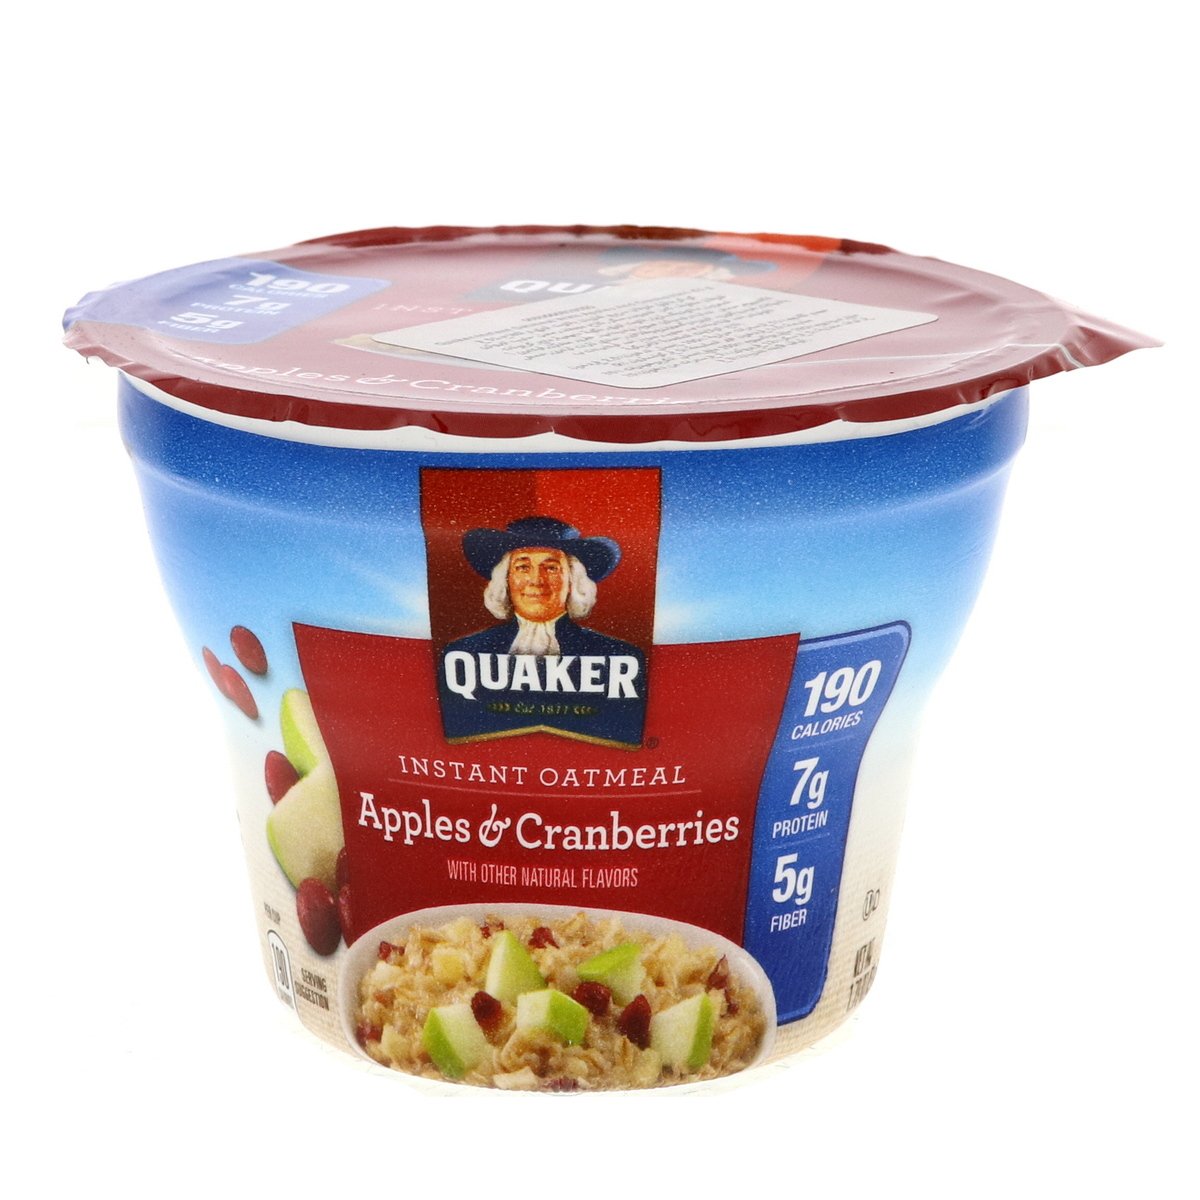 Quaker Instant Oatmeal Apples And Cranberries 51 g